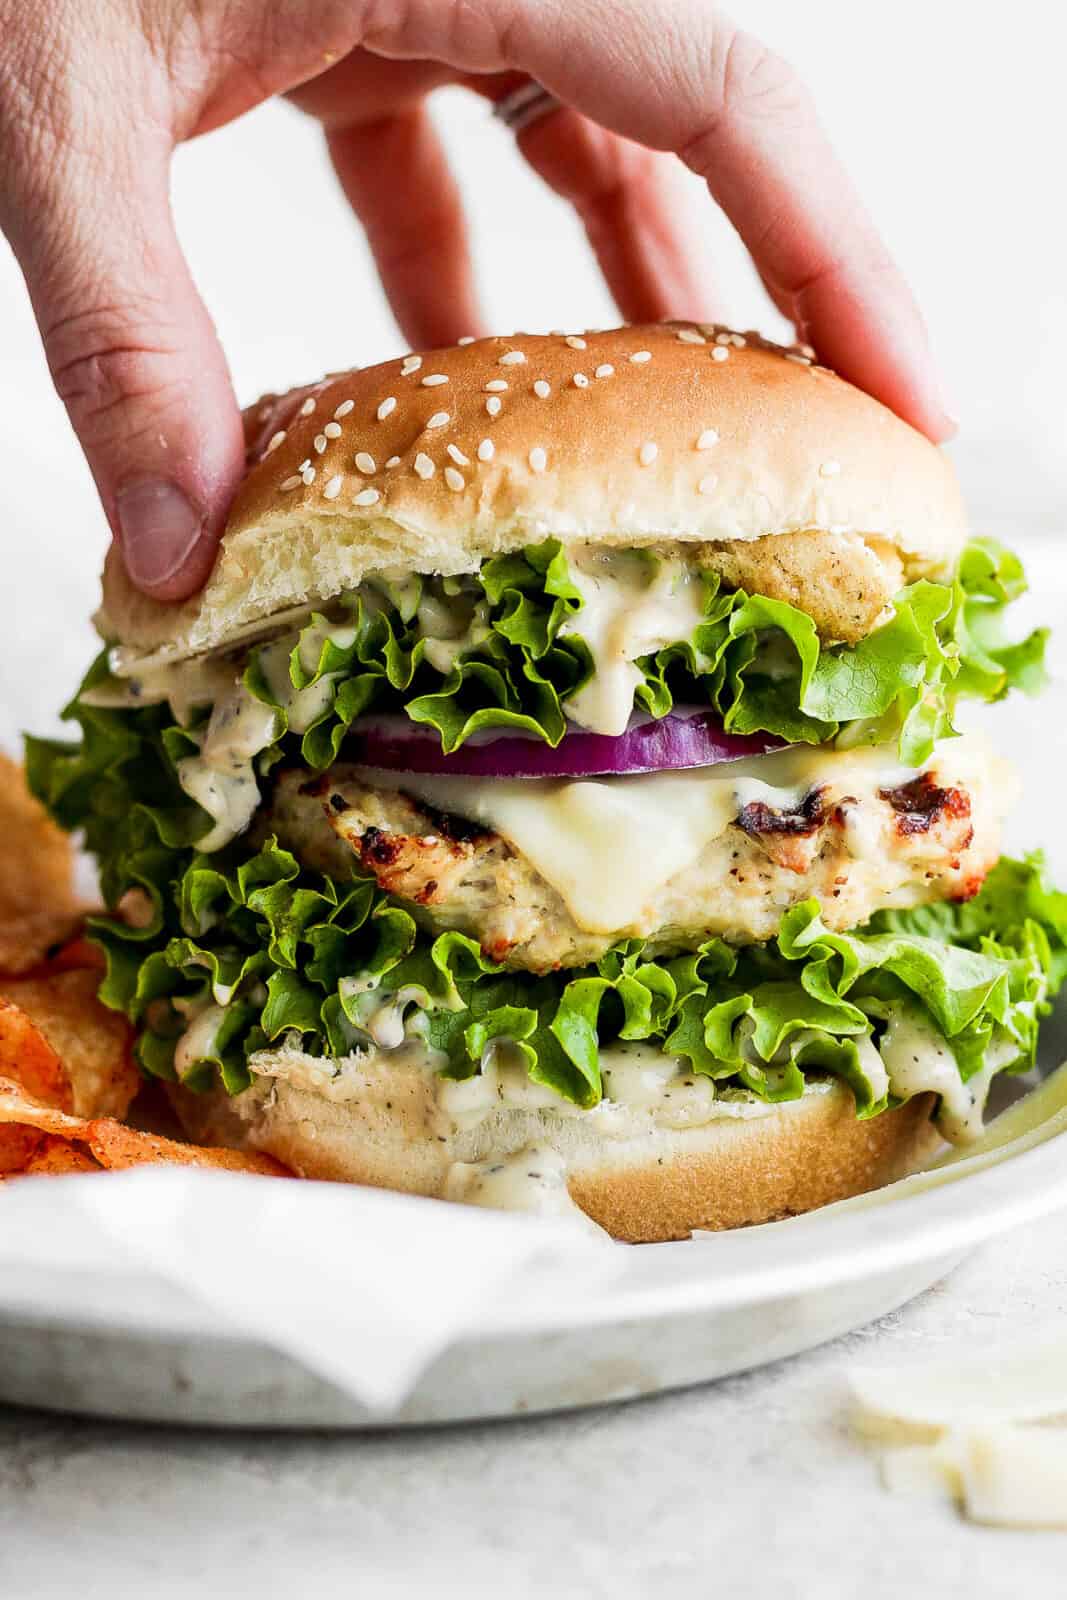 A juicy chicken caesar burger on a plate.